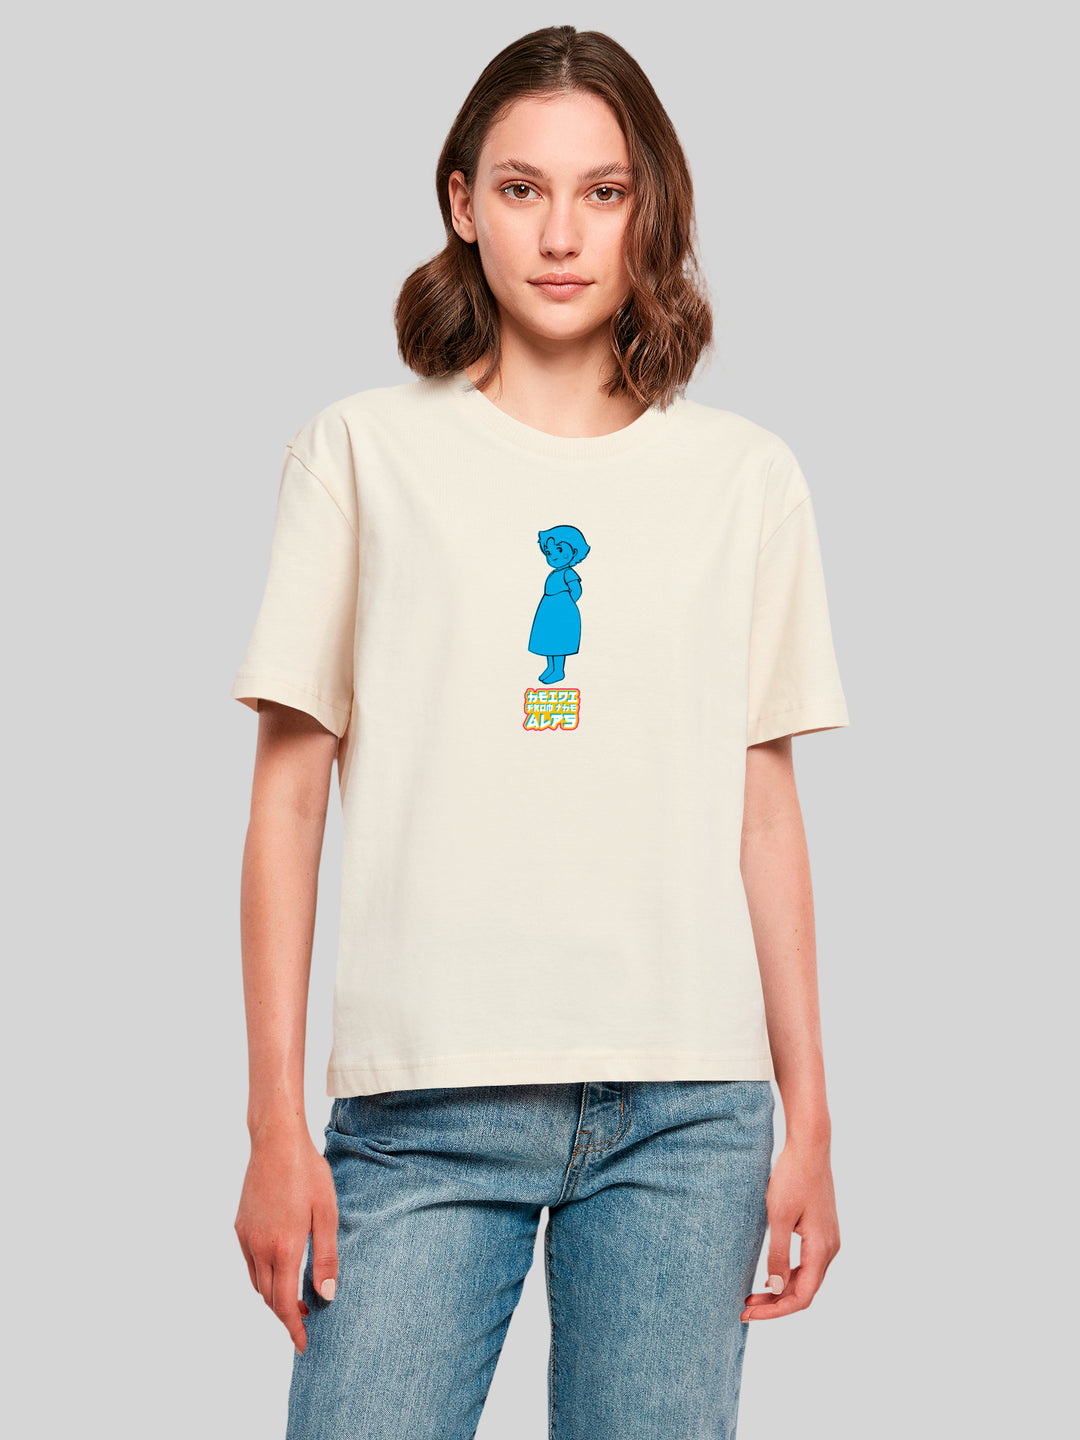 Heidi From The Alps | Heroes of Childhood | Girls Everyday Tee